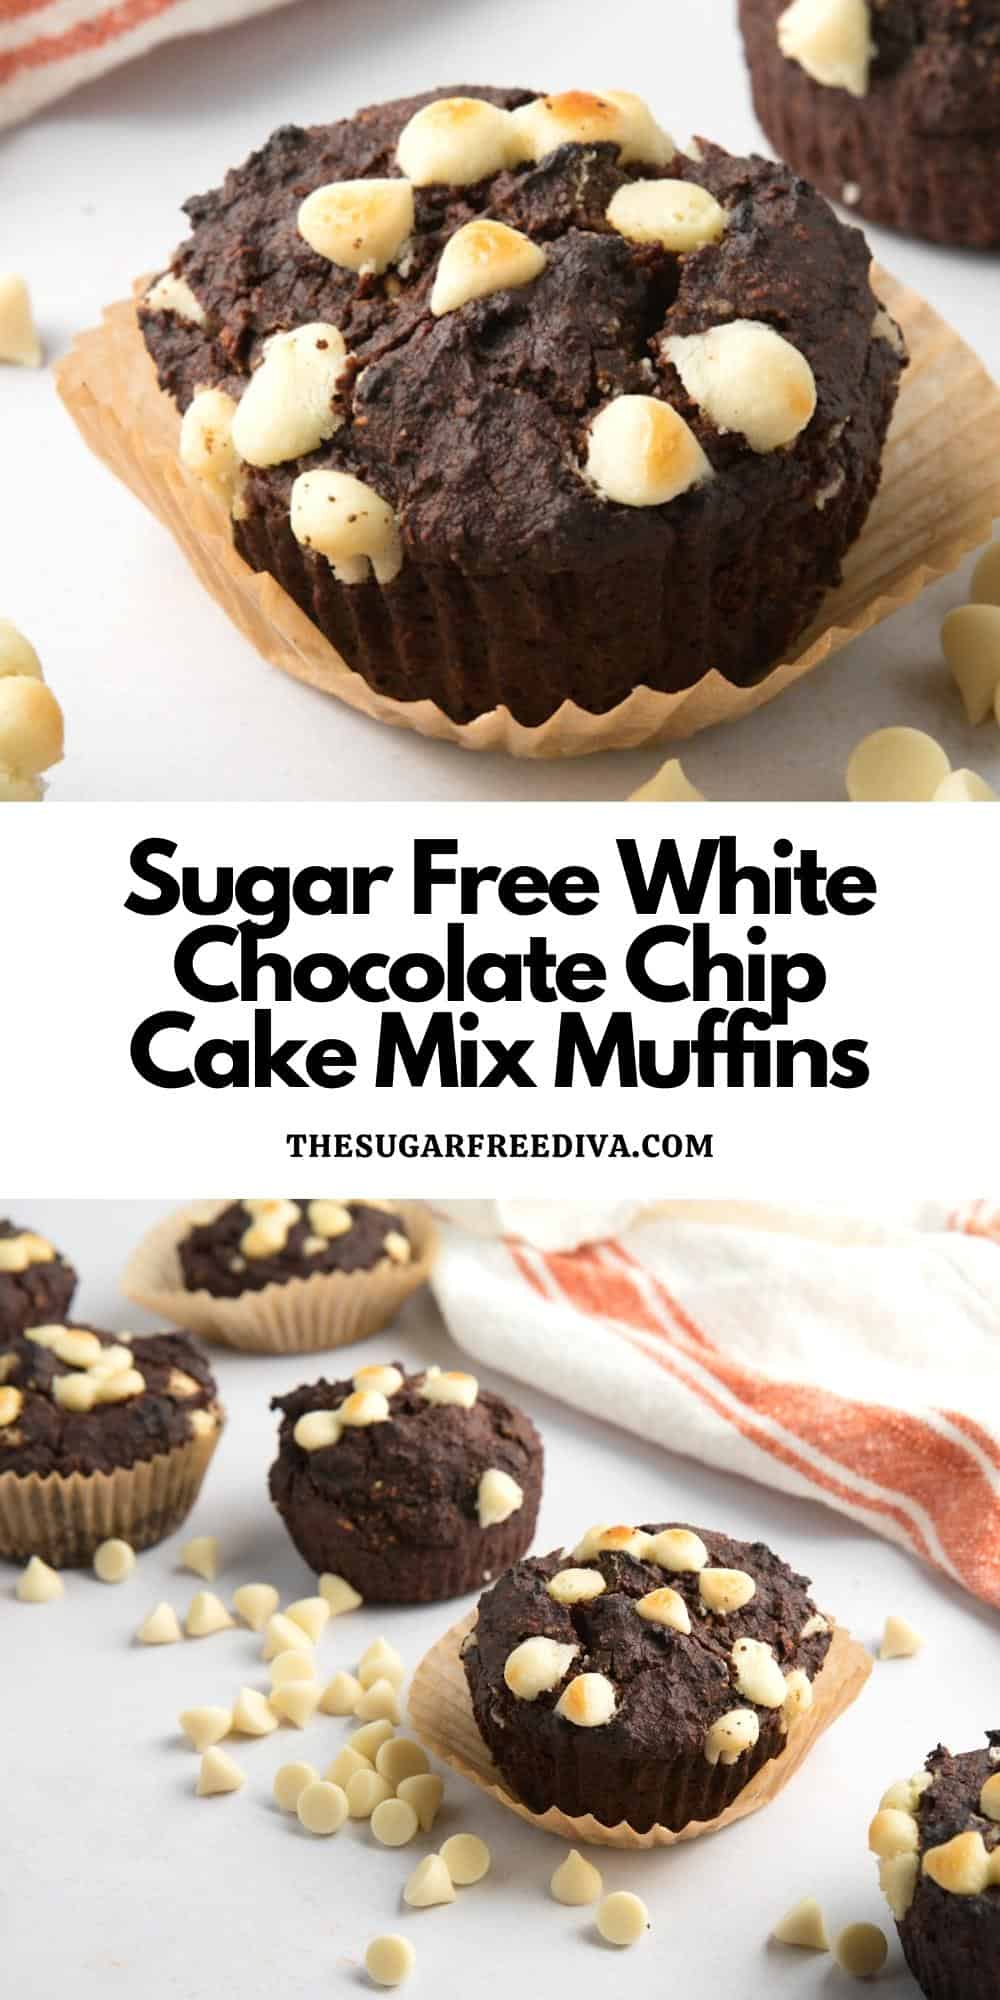 Sugar Free White Chocolate Chip Cake Mix Muffins, a simple and delicious recipe for making delicious muffins with no added sugar. keto option.